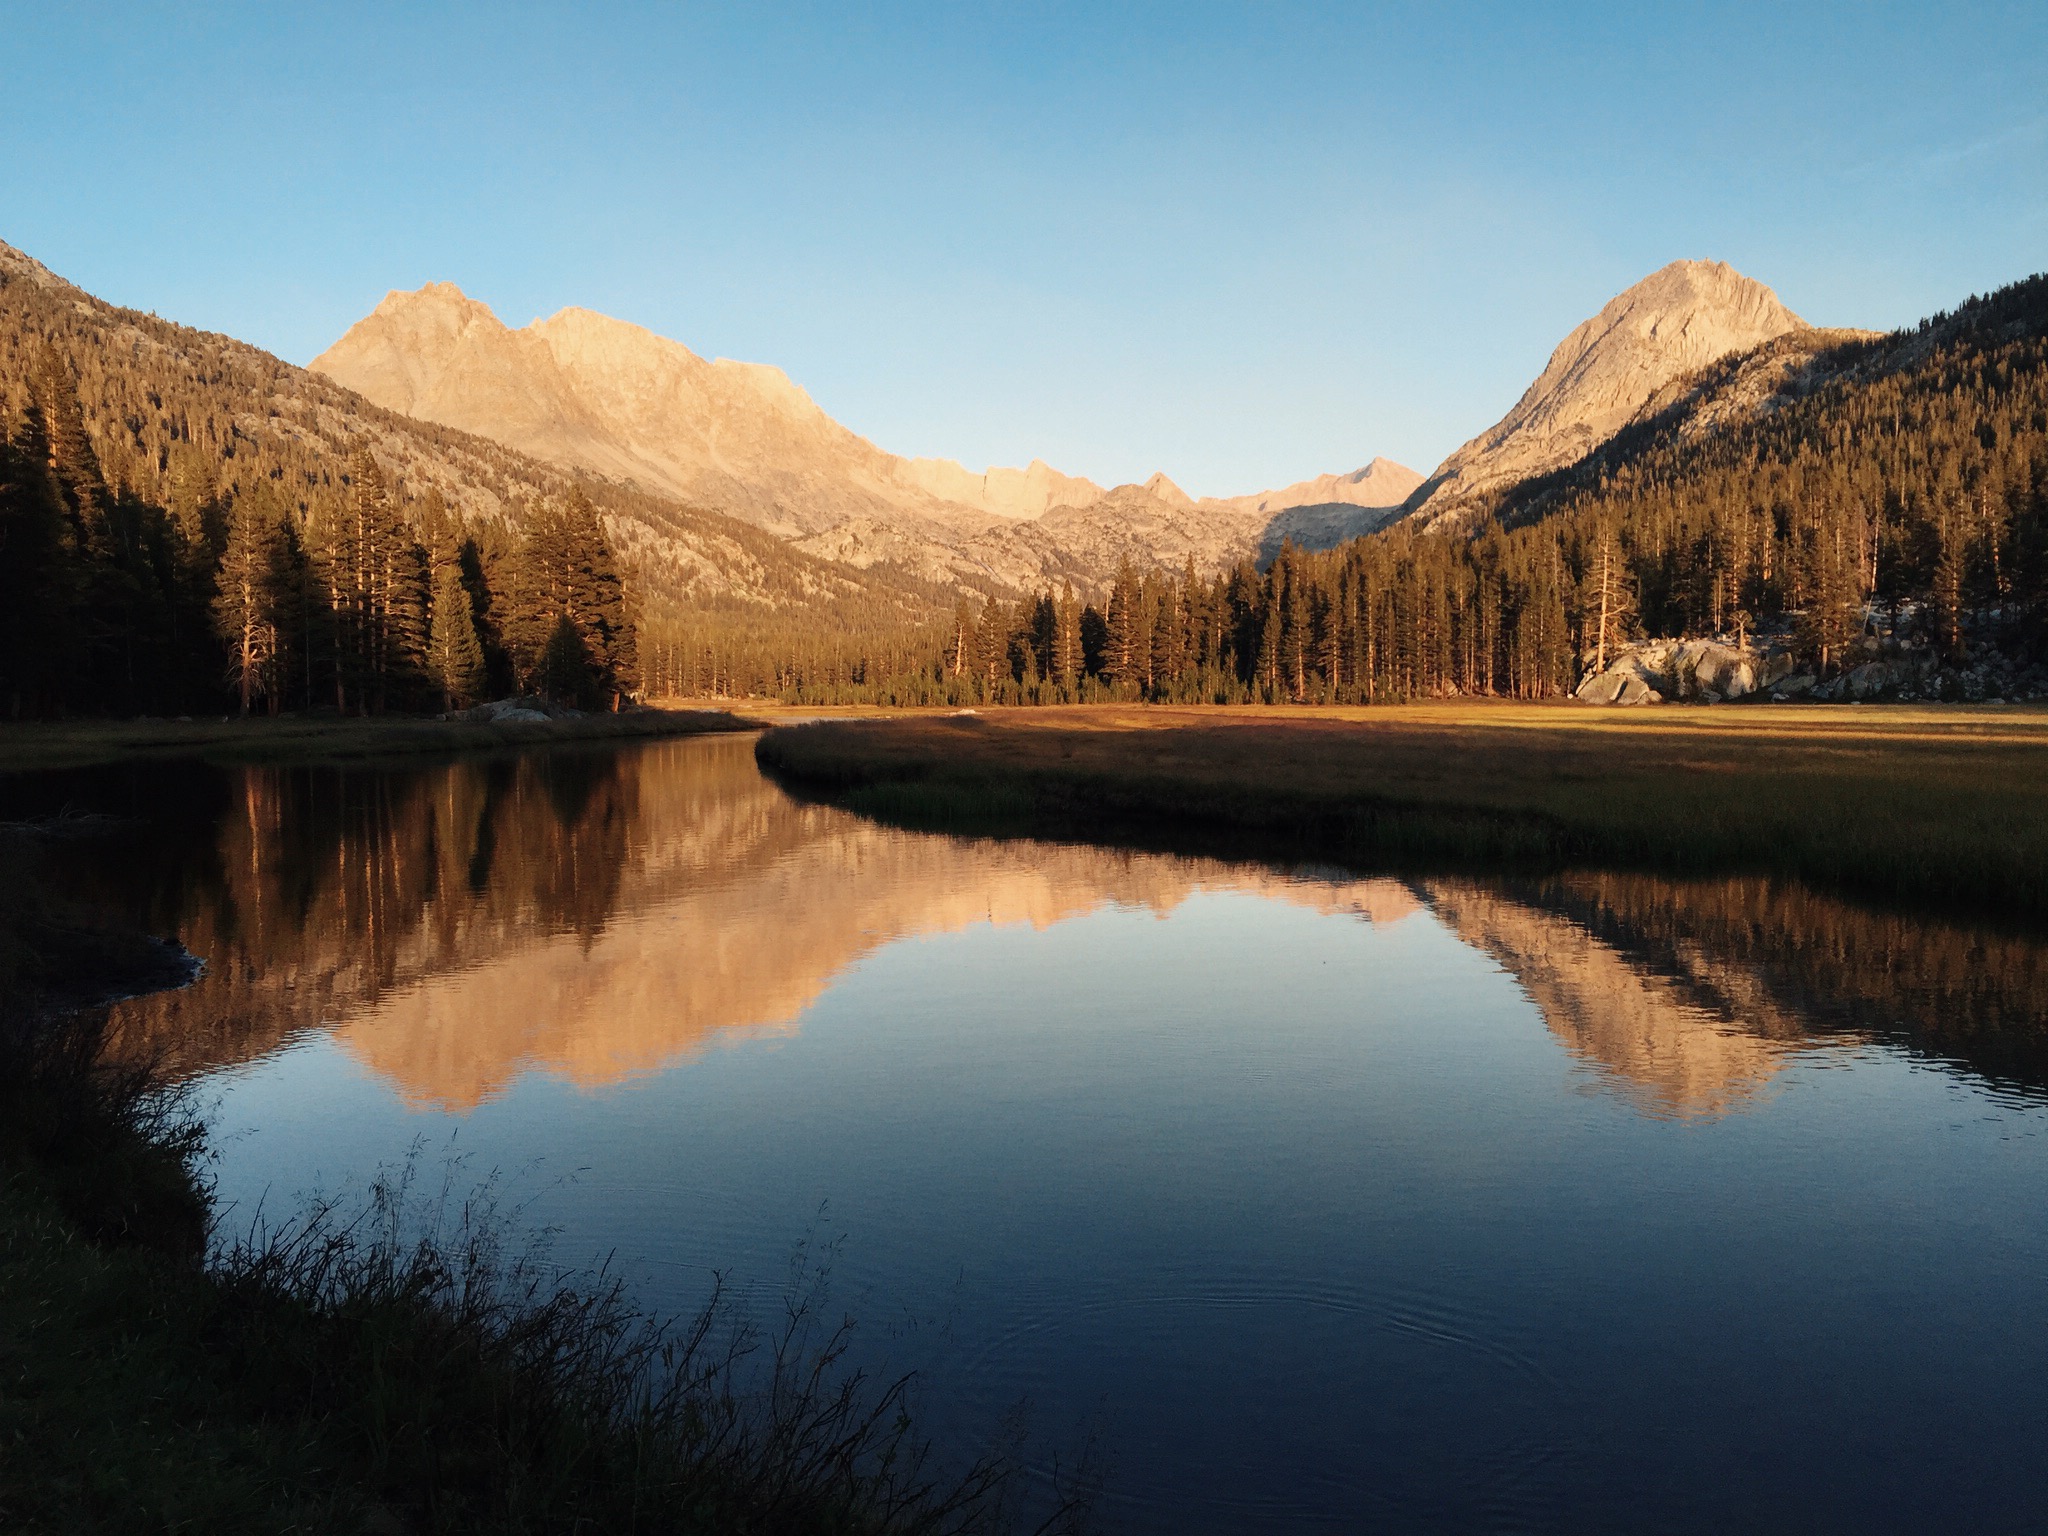  Sunset at McClure Meadow, with The Hermit (12,328') and the Evolution Group peaks reflected in Evolution Creek. 